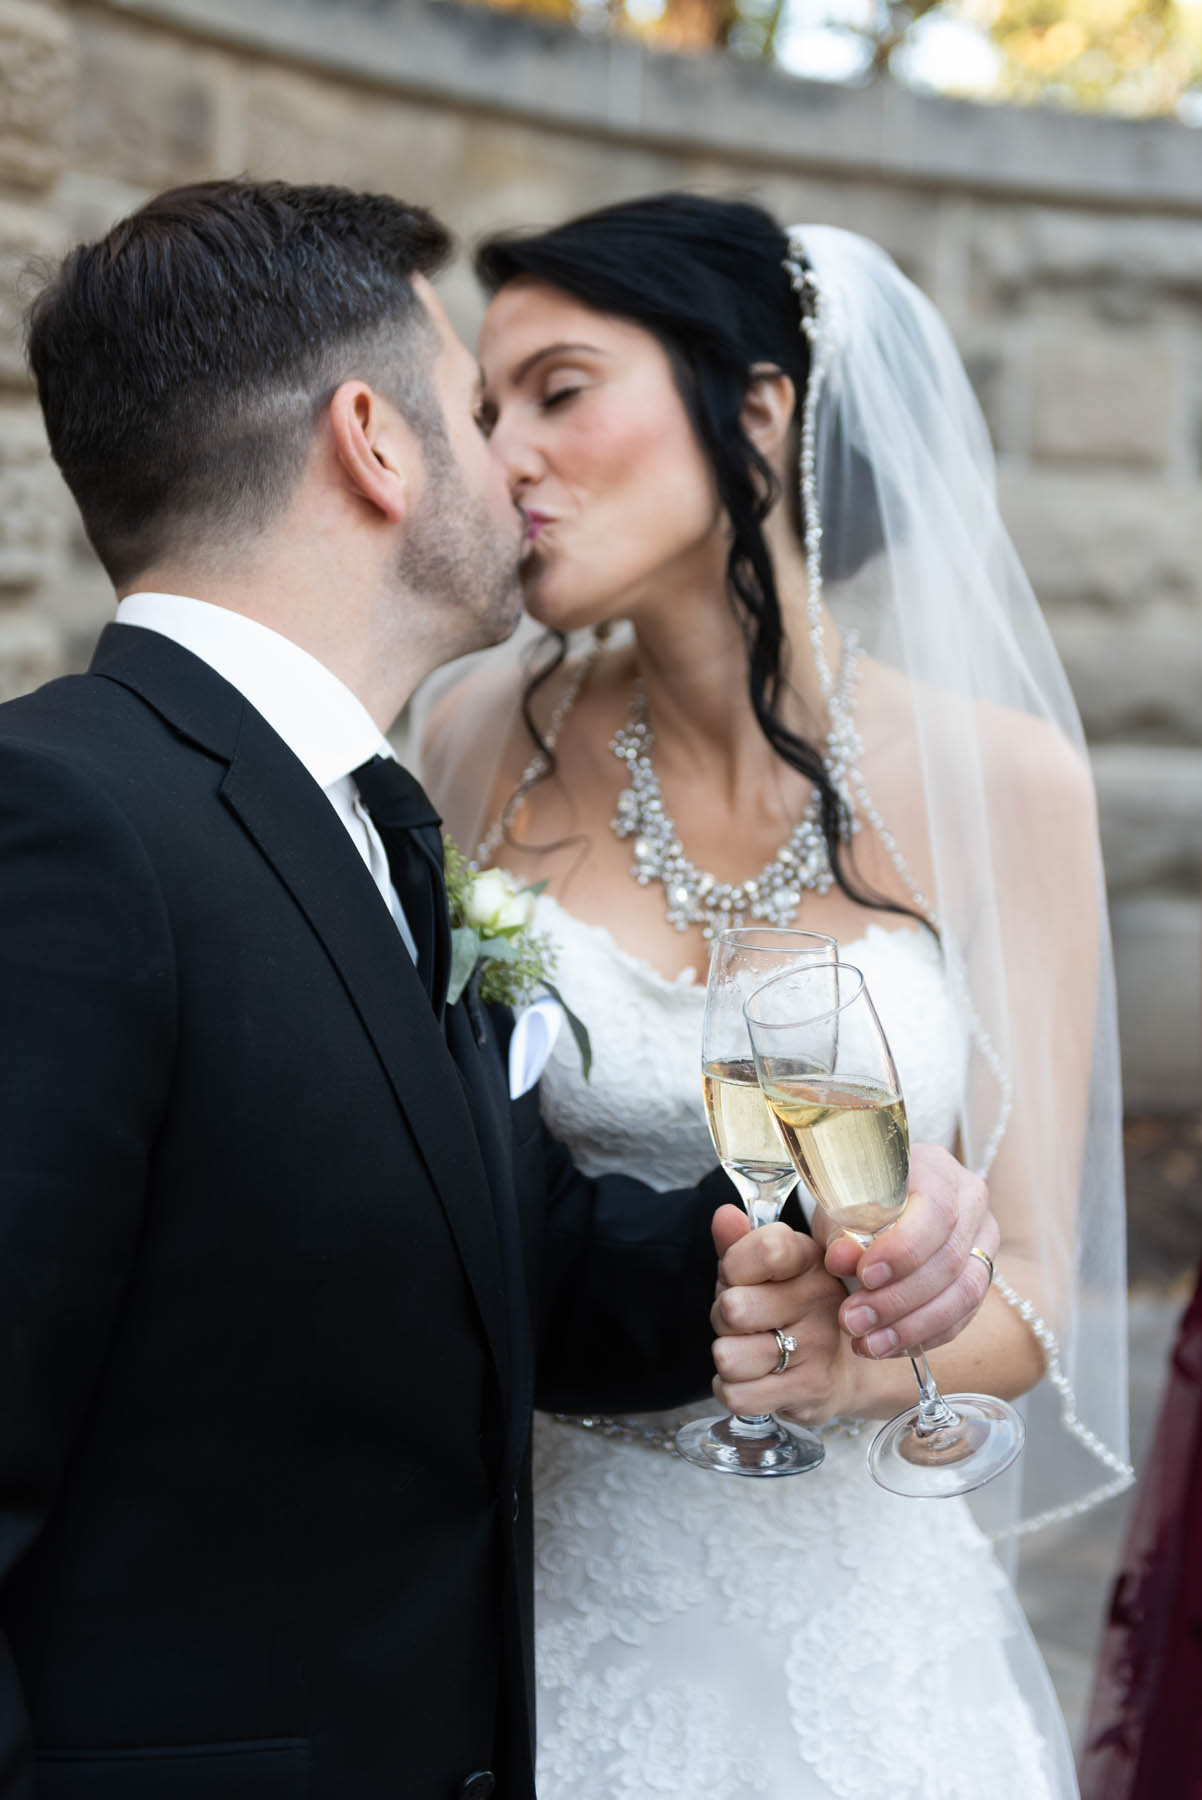 Skilled Photographer's Touch in Wedding Moments - Matt + Lindsay